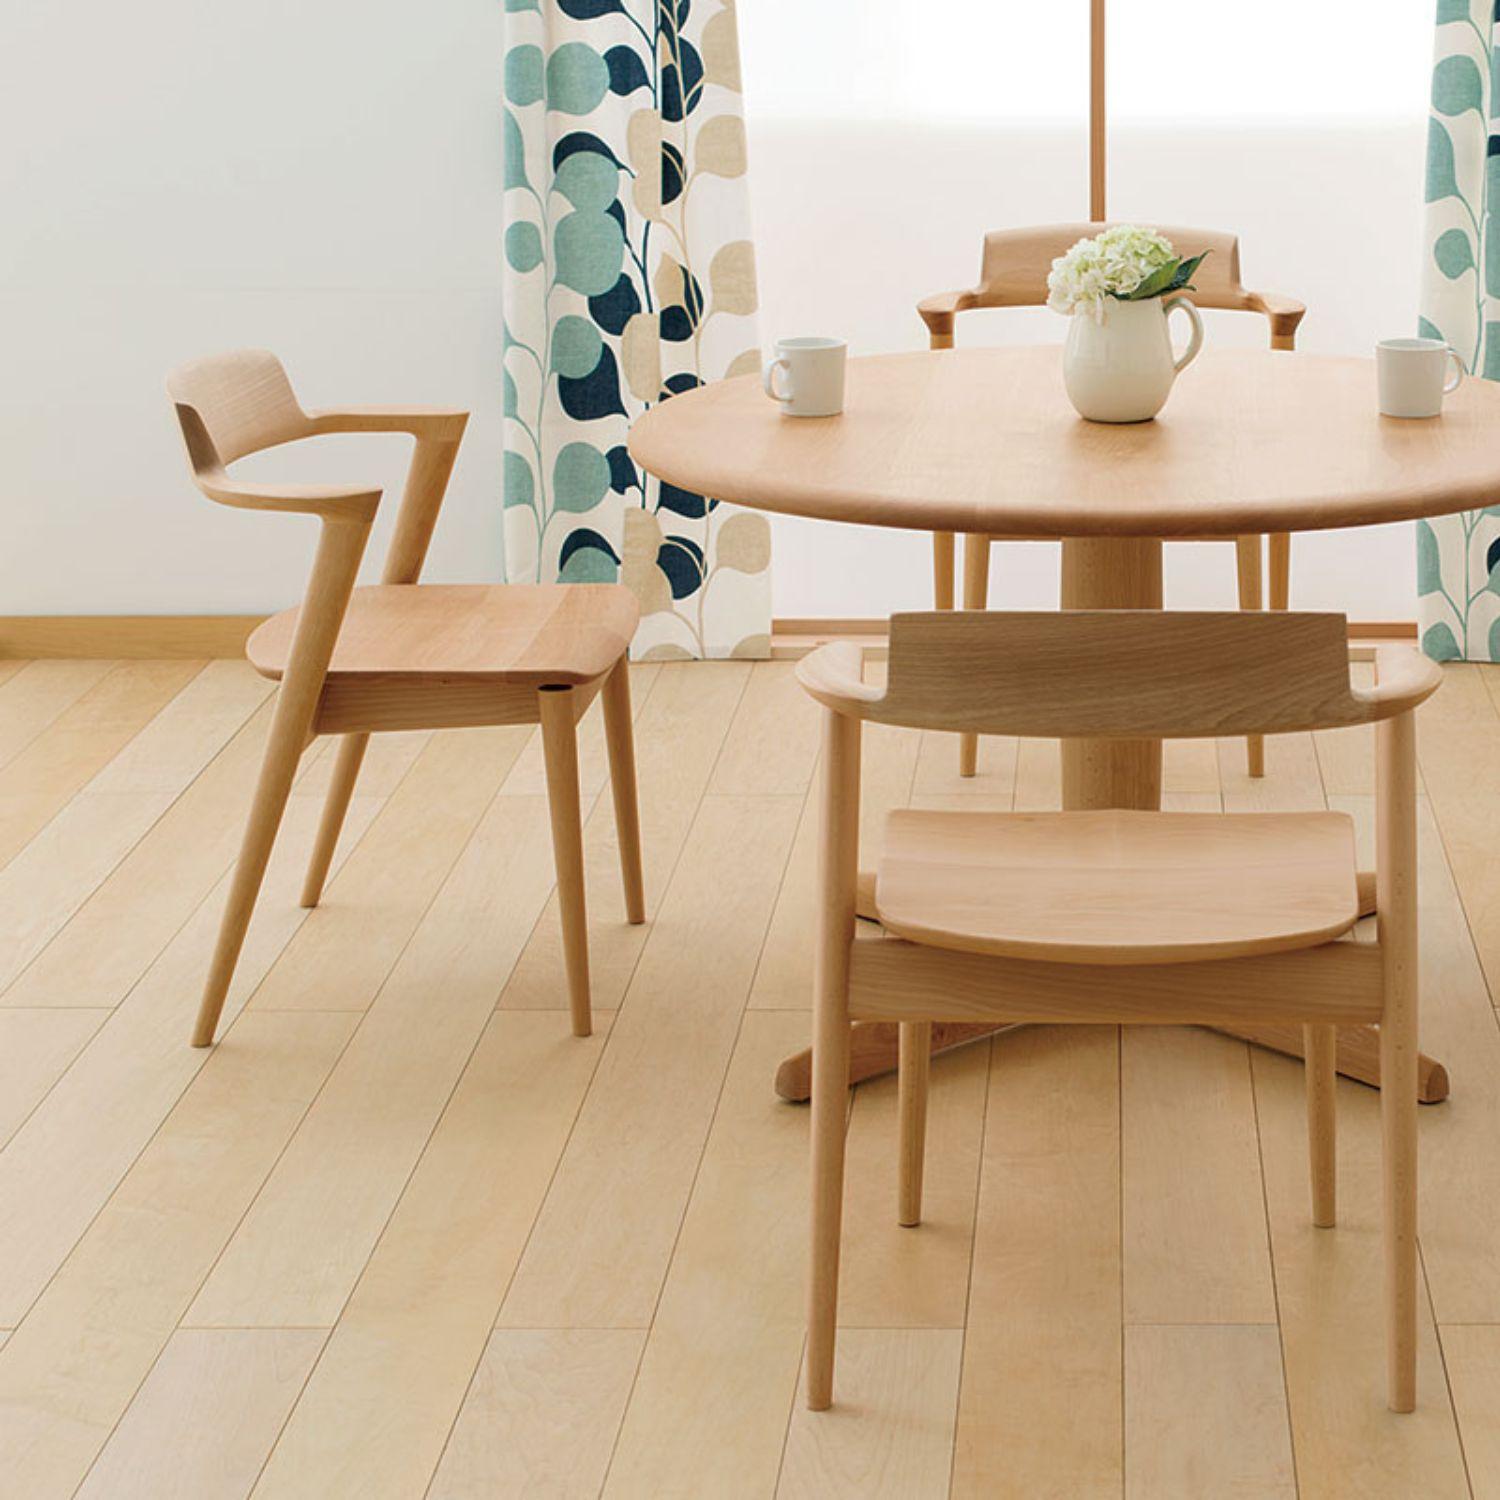 Motomi Kawakami 'Seoto KD21' semi-arm dining chair in beech for Hida.

For centuries, famed Hida artisans in Gifu prefecture have played a role in Japan's woodworking culture, crafting iconic bentwood furniture from sustainable local forests.